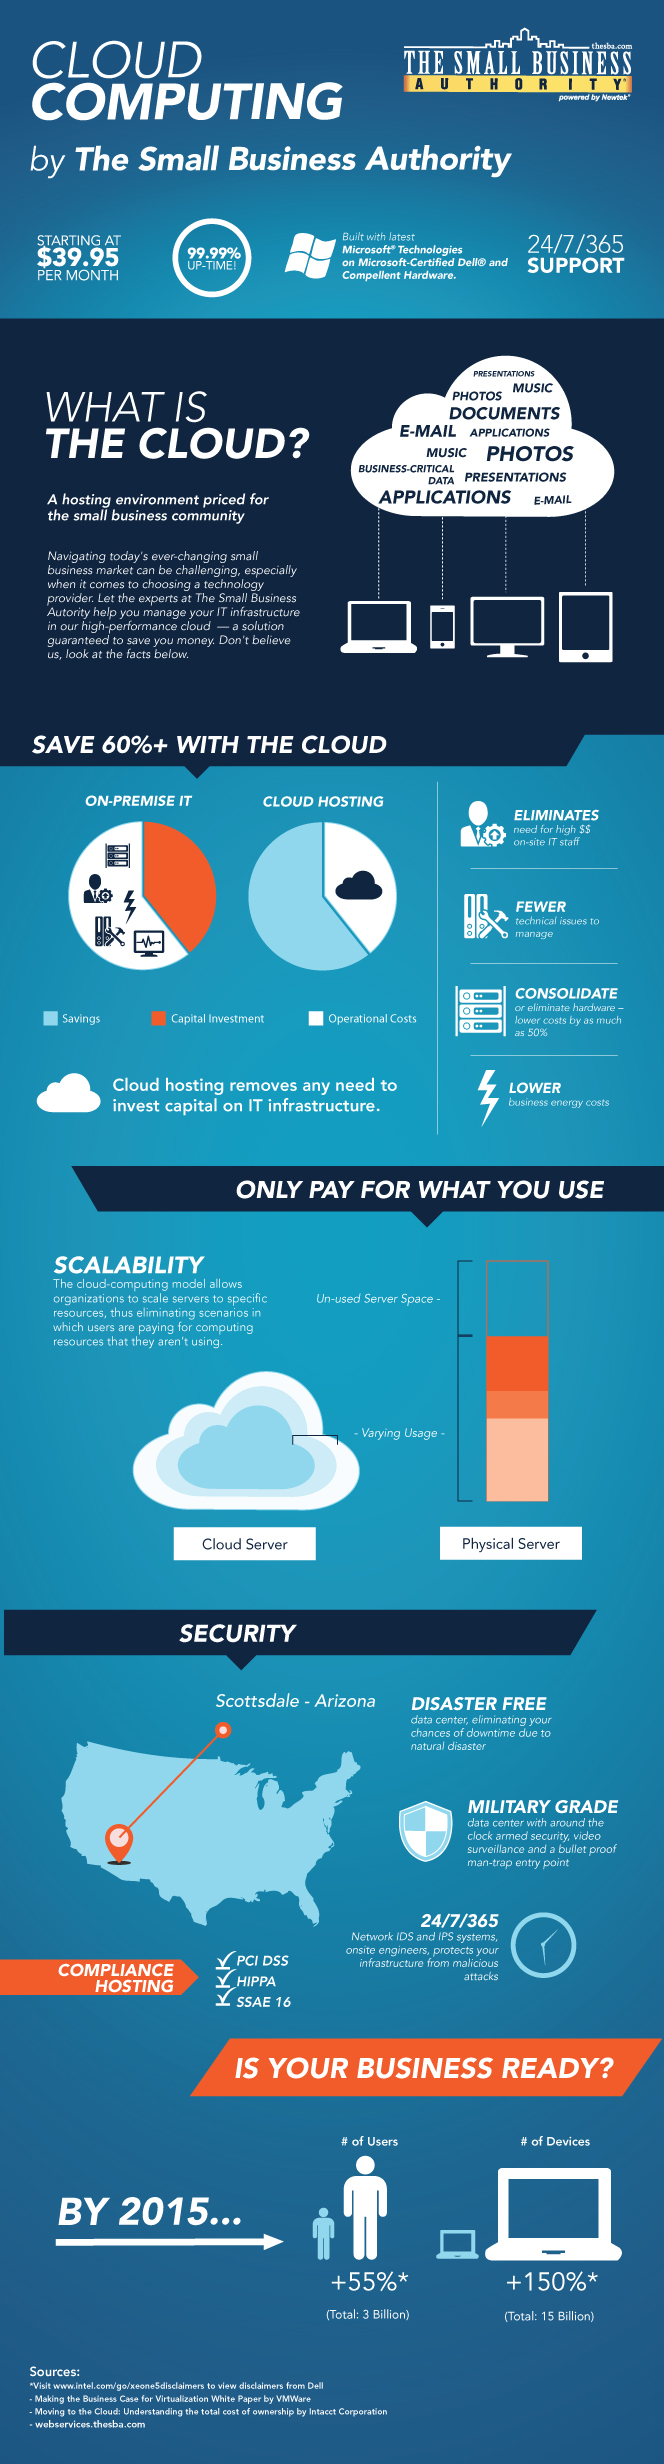 Infographic: Small businesses and the cloud - TechRepublic